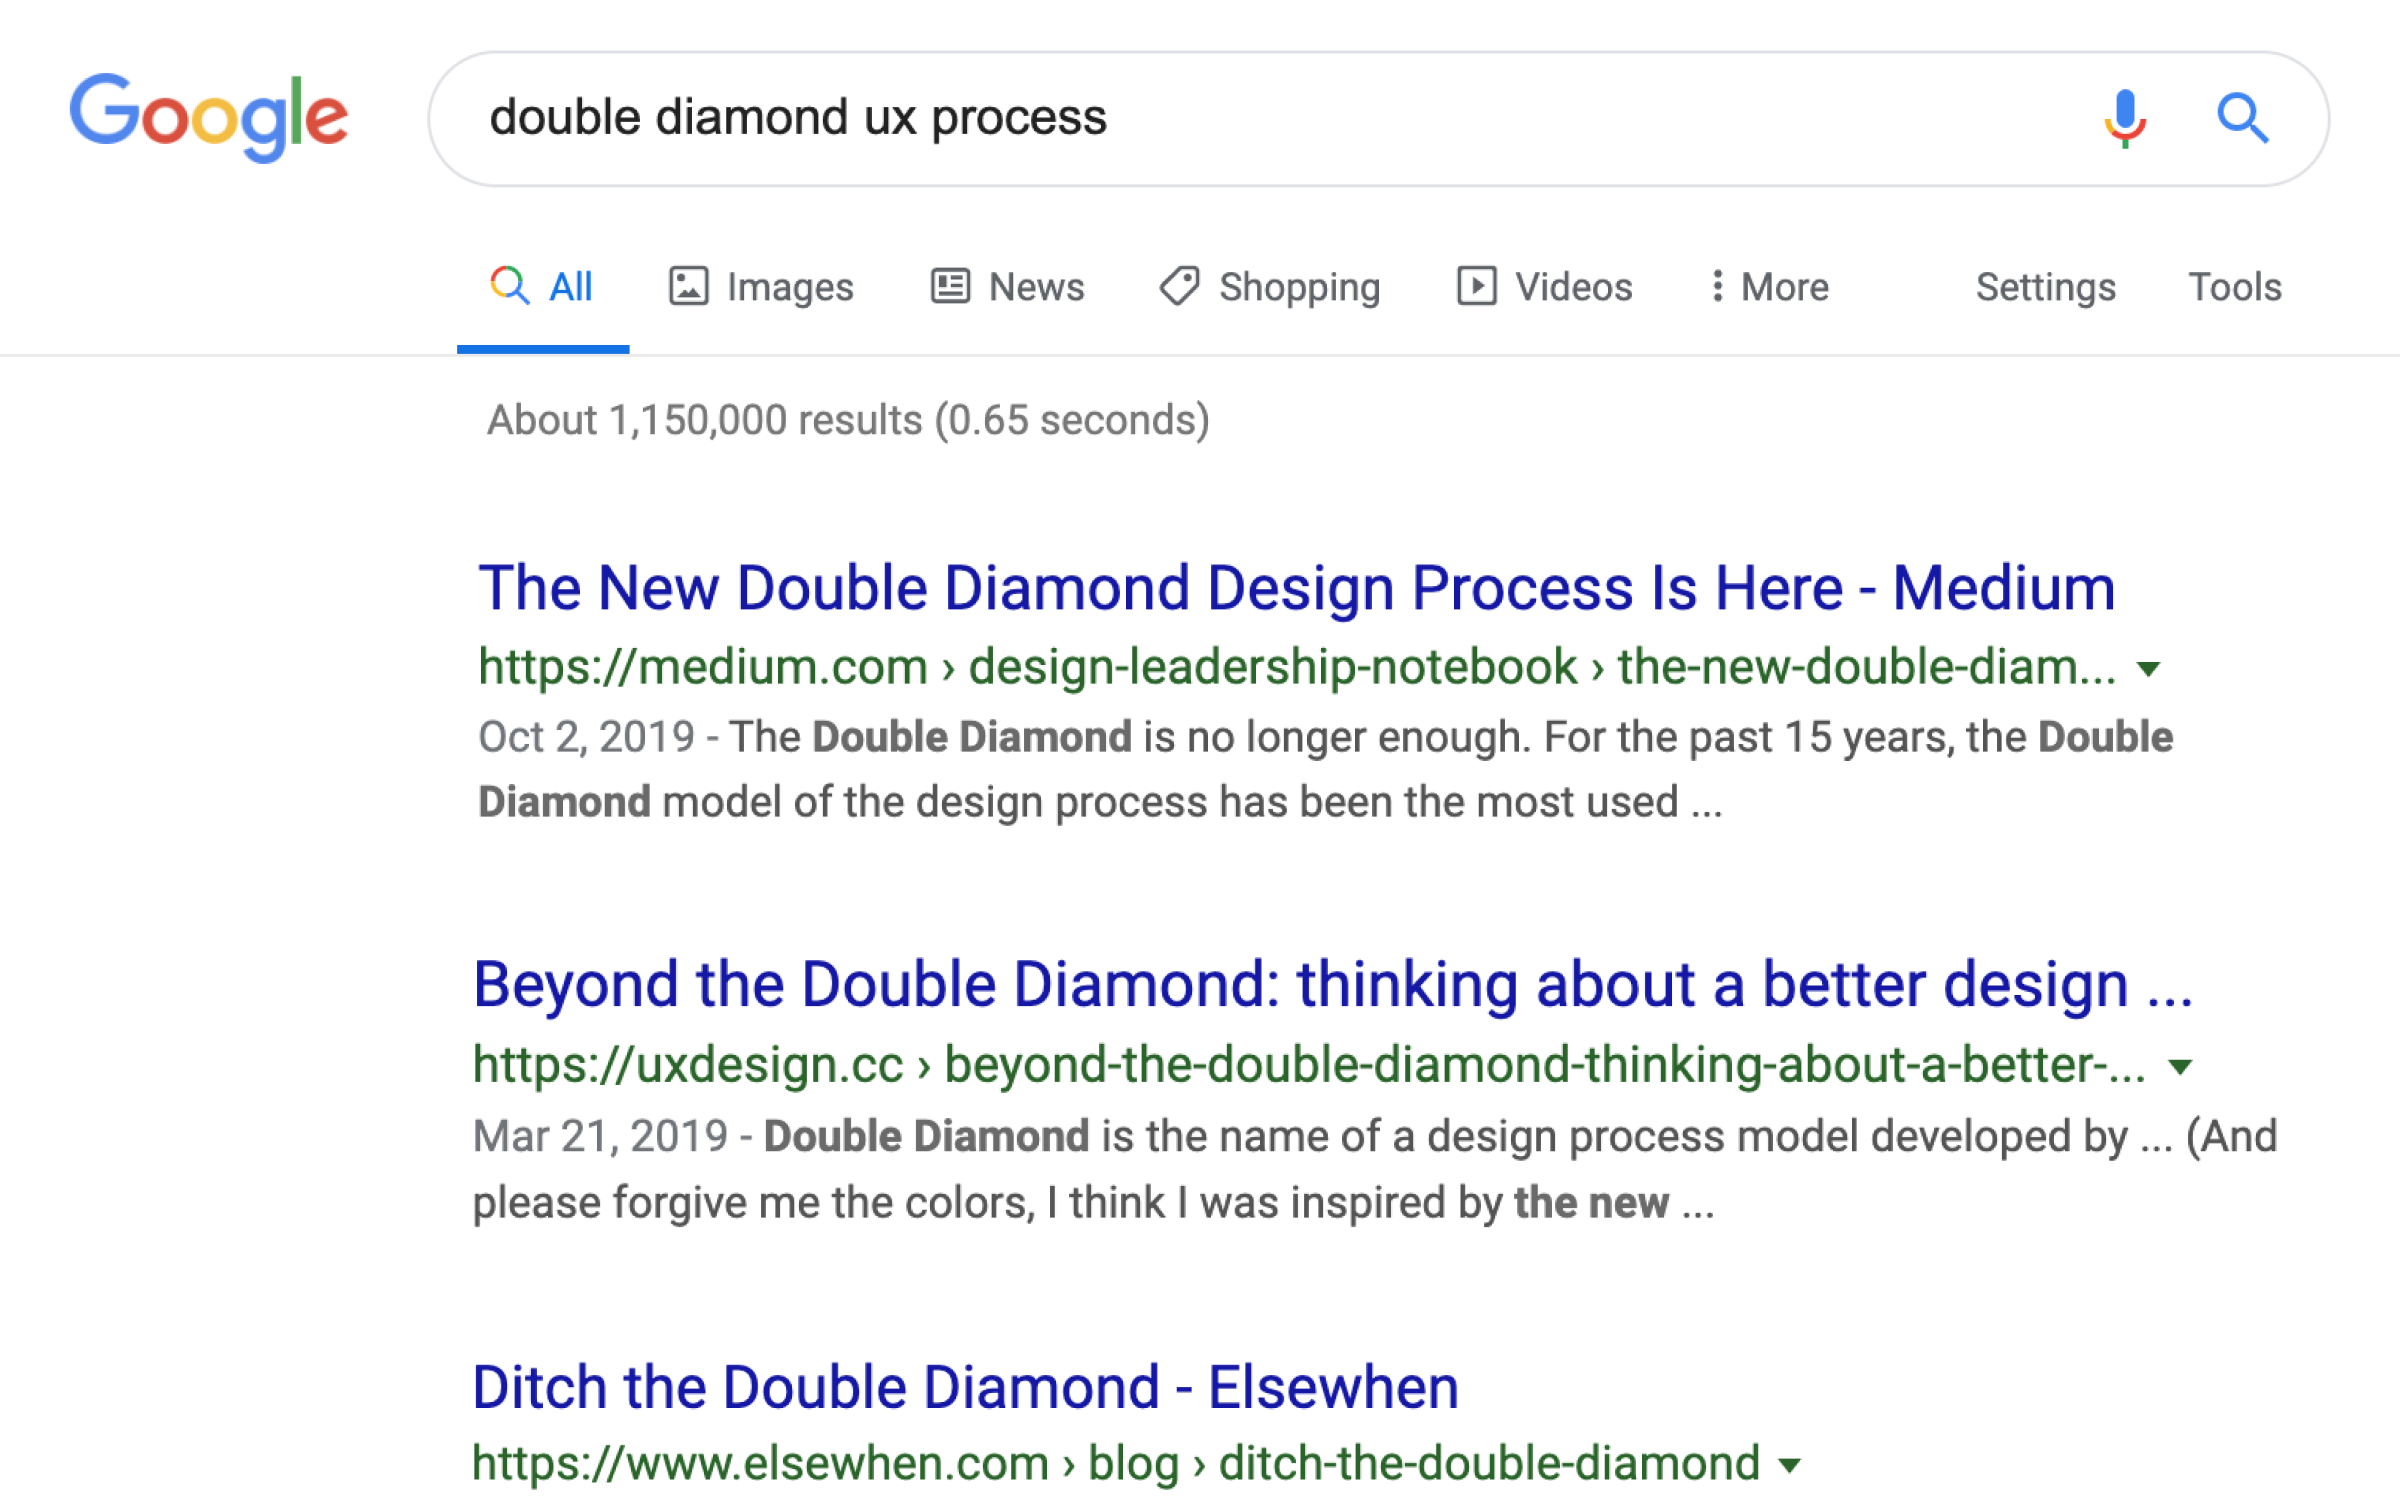 Writing about the double diamond? There’s a lot of great content out there that you can credit and build from.